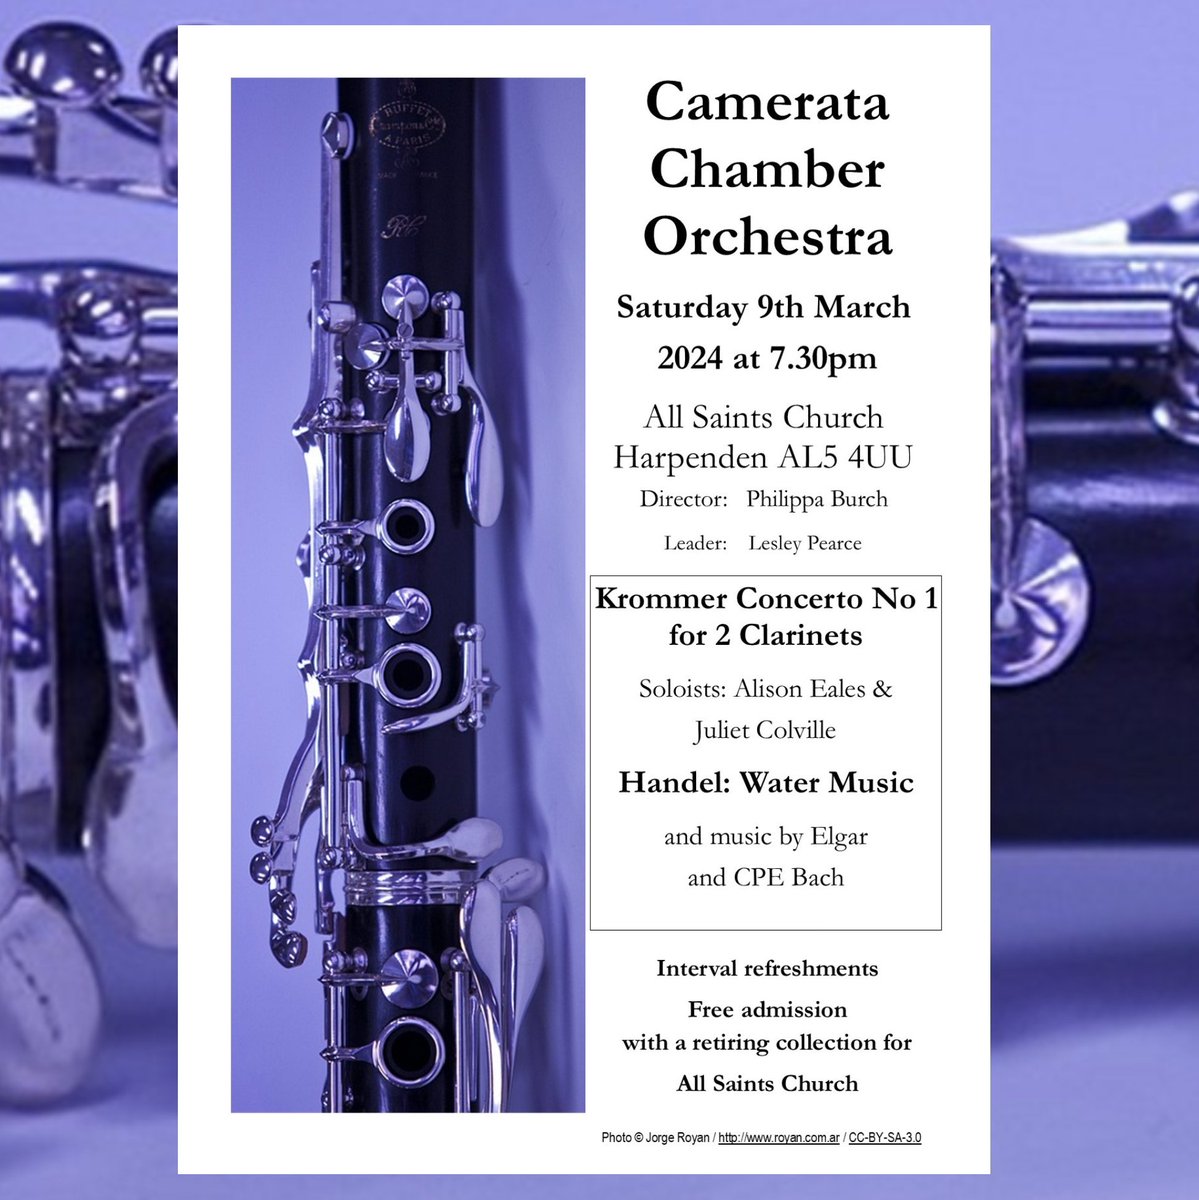 This Saturday 9th Mar, 7.30pm, you are invited to this FREE concert by Camerata Chamber Orchestra #harpenden #batford #music #concert